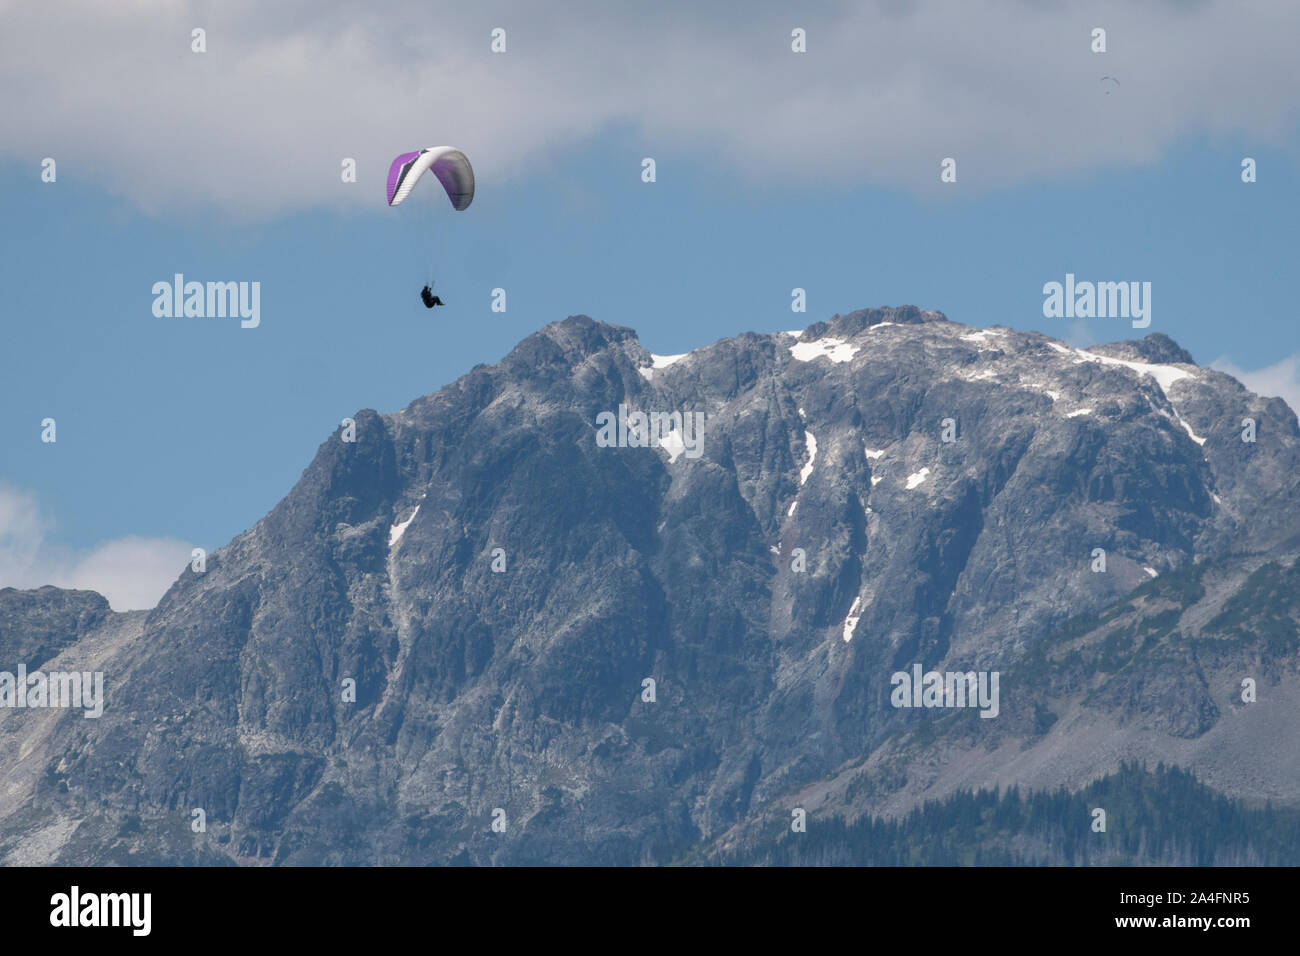 Paragliders fly high above snow covered mountains on a sunny day. Stock Photo